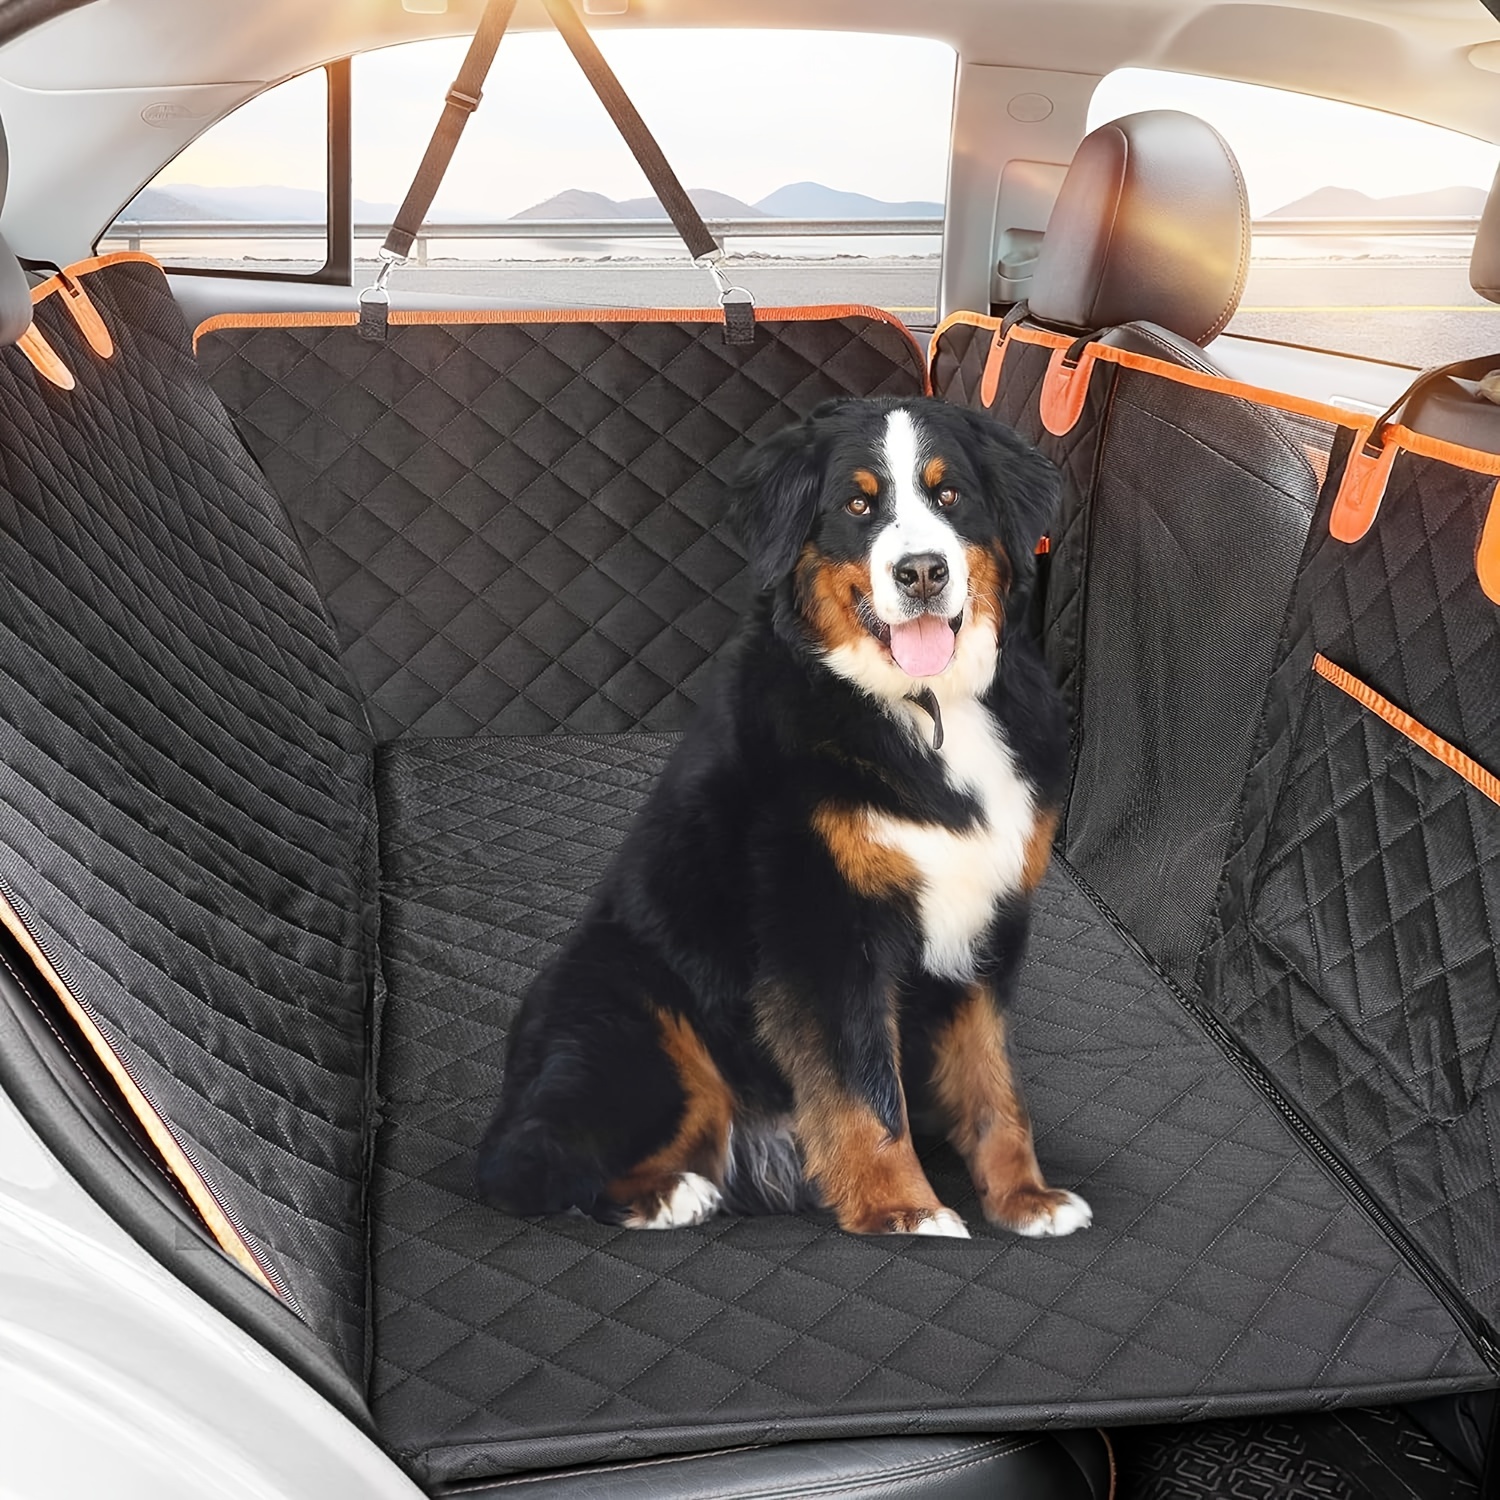 

Back Seat Extender, Dog Seat Cover For Rear Seat, Waterproof Scratch Resistant Dog Car Seat Cover With Mesh Window, Non-slip Pet Car Seat Protector For Cars/trucks/suv